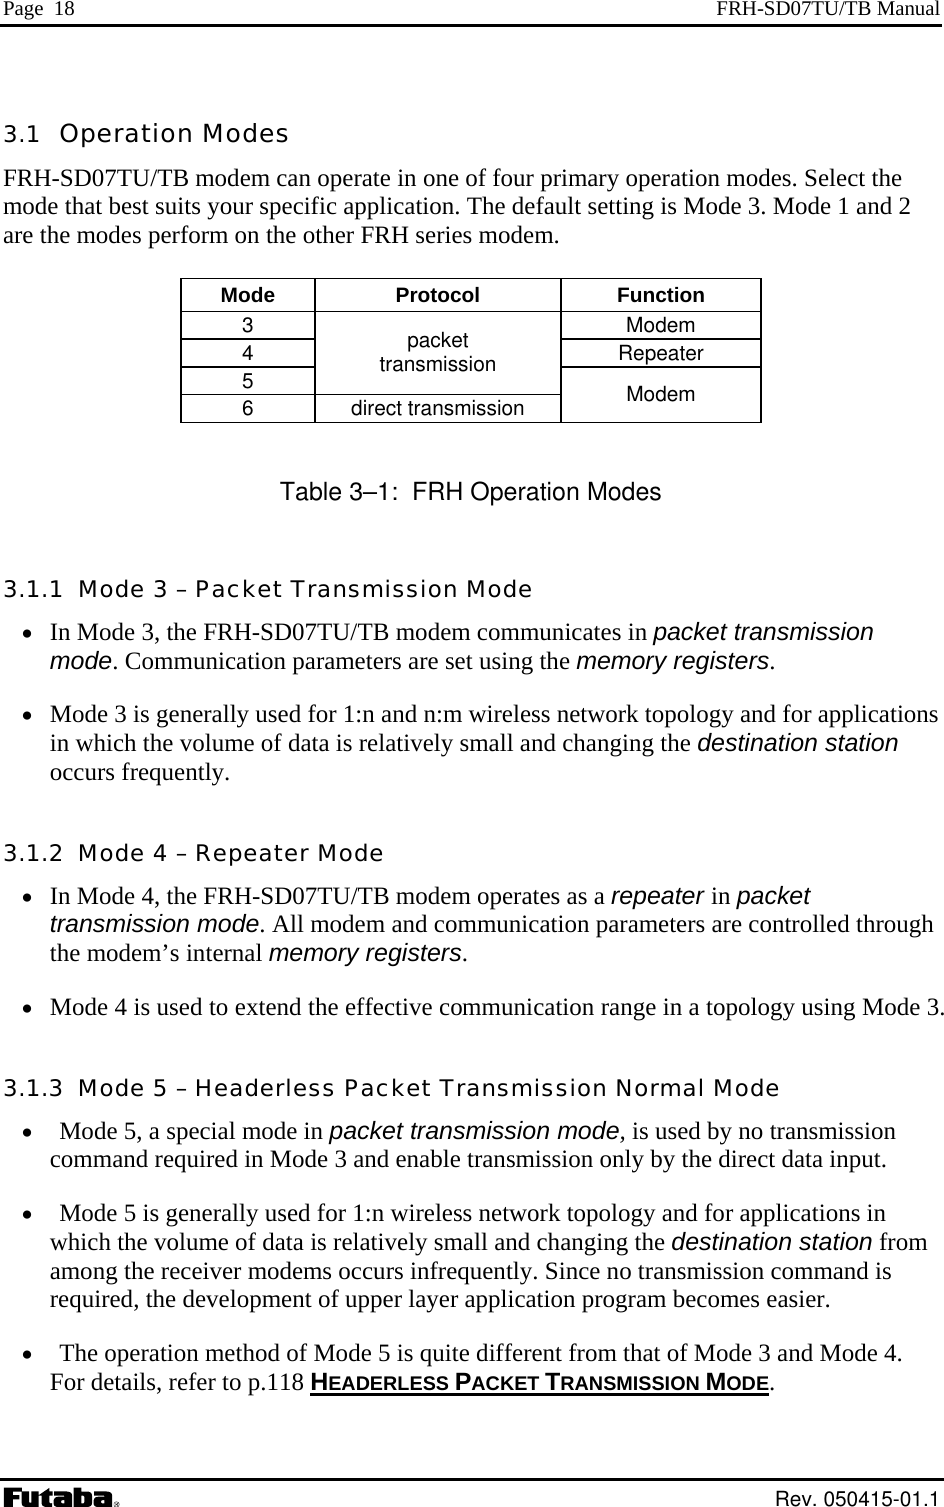 Page  18  FRH-SD07TU/TB Manual 3.1  Operation Modes FRH-SD07TU/TB modem can operate in one of four primary operation modes. Select the mode that best suits your specific application. The default setting is Mode 3. Mode 1 and 2 are the modes perform on the other FRH series modem.  Mode Protocol  Function 3 Modem 4 Repeater 5 packet transmission 6 direct transmission  Modem  Table 3–1:  FRH Operation Modes 3.1.1  Mode 3 – Packet Transmission Mode •  In Mode 3, the FRH-SD07TU/TB modem communicates in packet transmission mode. Communication parameters are set using the memory registers. •  Mode 3 is generally used for 1:n and n:m wireless network topology and for applications in which the volume of data is relatively small and changing the destination station occurs frequently. 3.1.2  Mode 4 – Repeater Mode •  In Mode 4, the FRH-SD07TU/TB modem operates as a repeater in packet transmission mode. All modem and communication parameters are controlled through the modem’s internal memory registers. •  Mode 4 is used to extend the effective communication range in a topology using Mode 3. 3.1.3  Mode 5 – Headerless Packet Transmission Normal Mode •  Mode 5, a special mode in packet transmission mode, is used by no transmission command required in Mode 3 and enable transmission only by the direct data input. •  Mode 5 is generally used for 1:n wireless network topology and for applications in which the volume of data is relatively small and changing the destination station from among the receiver modems occurs infrequently. Since no transmission command is required, the development of upper layer application program becomes easier. •  The operation method of Mode 5 is quite different from that of Mode 3 and Mode 4. For details, refer to p.118 HEADERLESS PACKET TRANSMISSION MODE.  Rev. 050415-01.1 